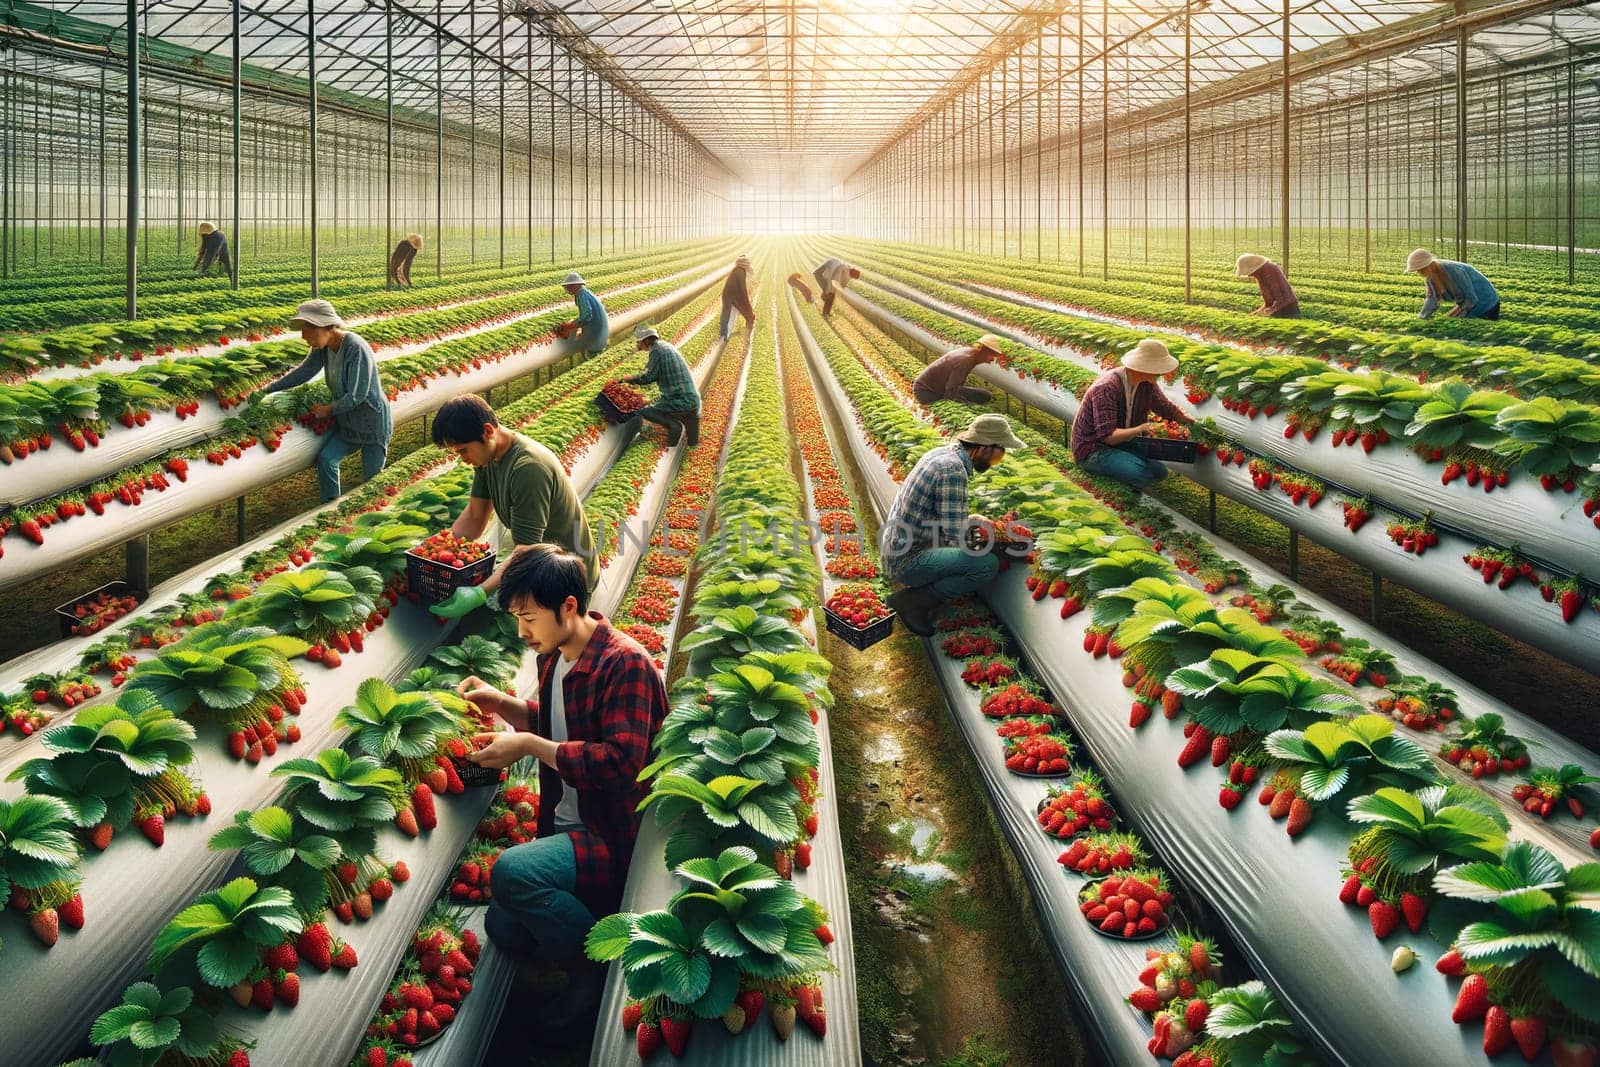 workers picking strawberries in a greenhouse by Annado